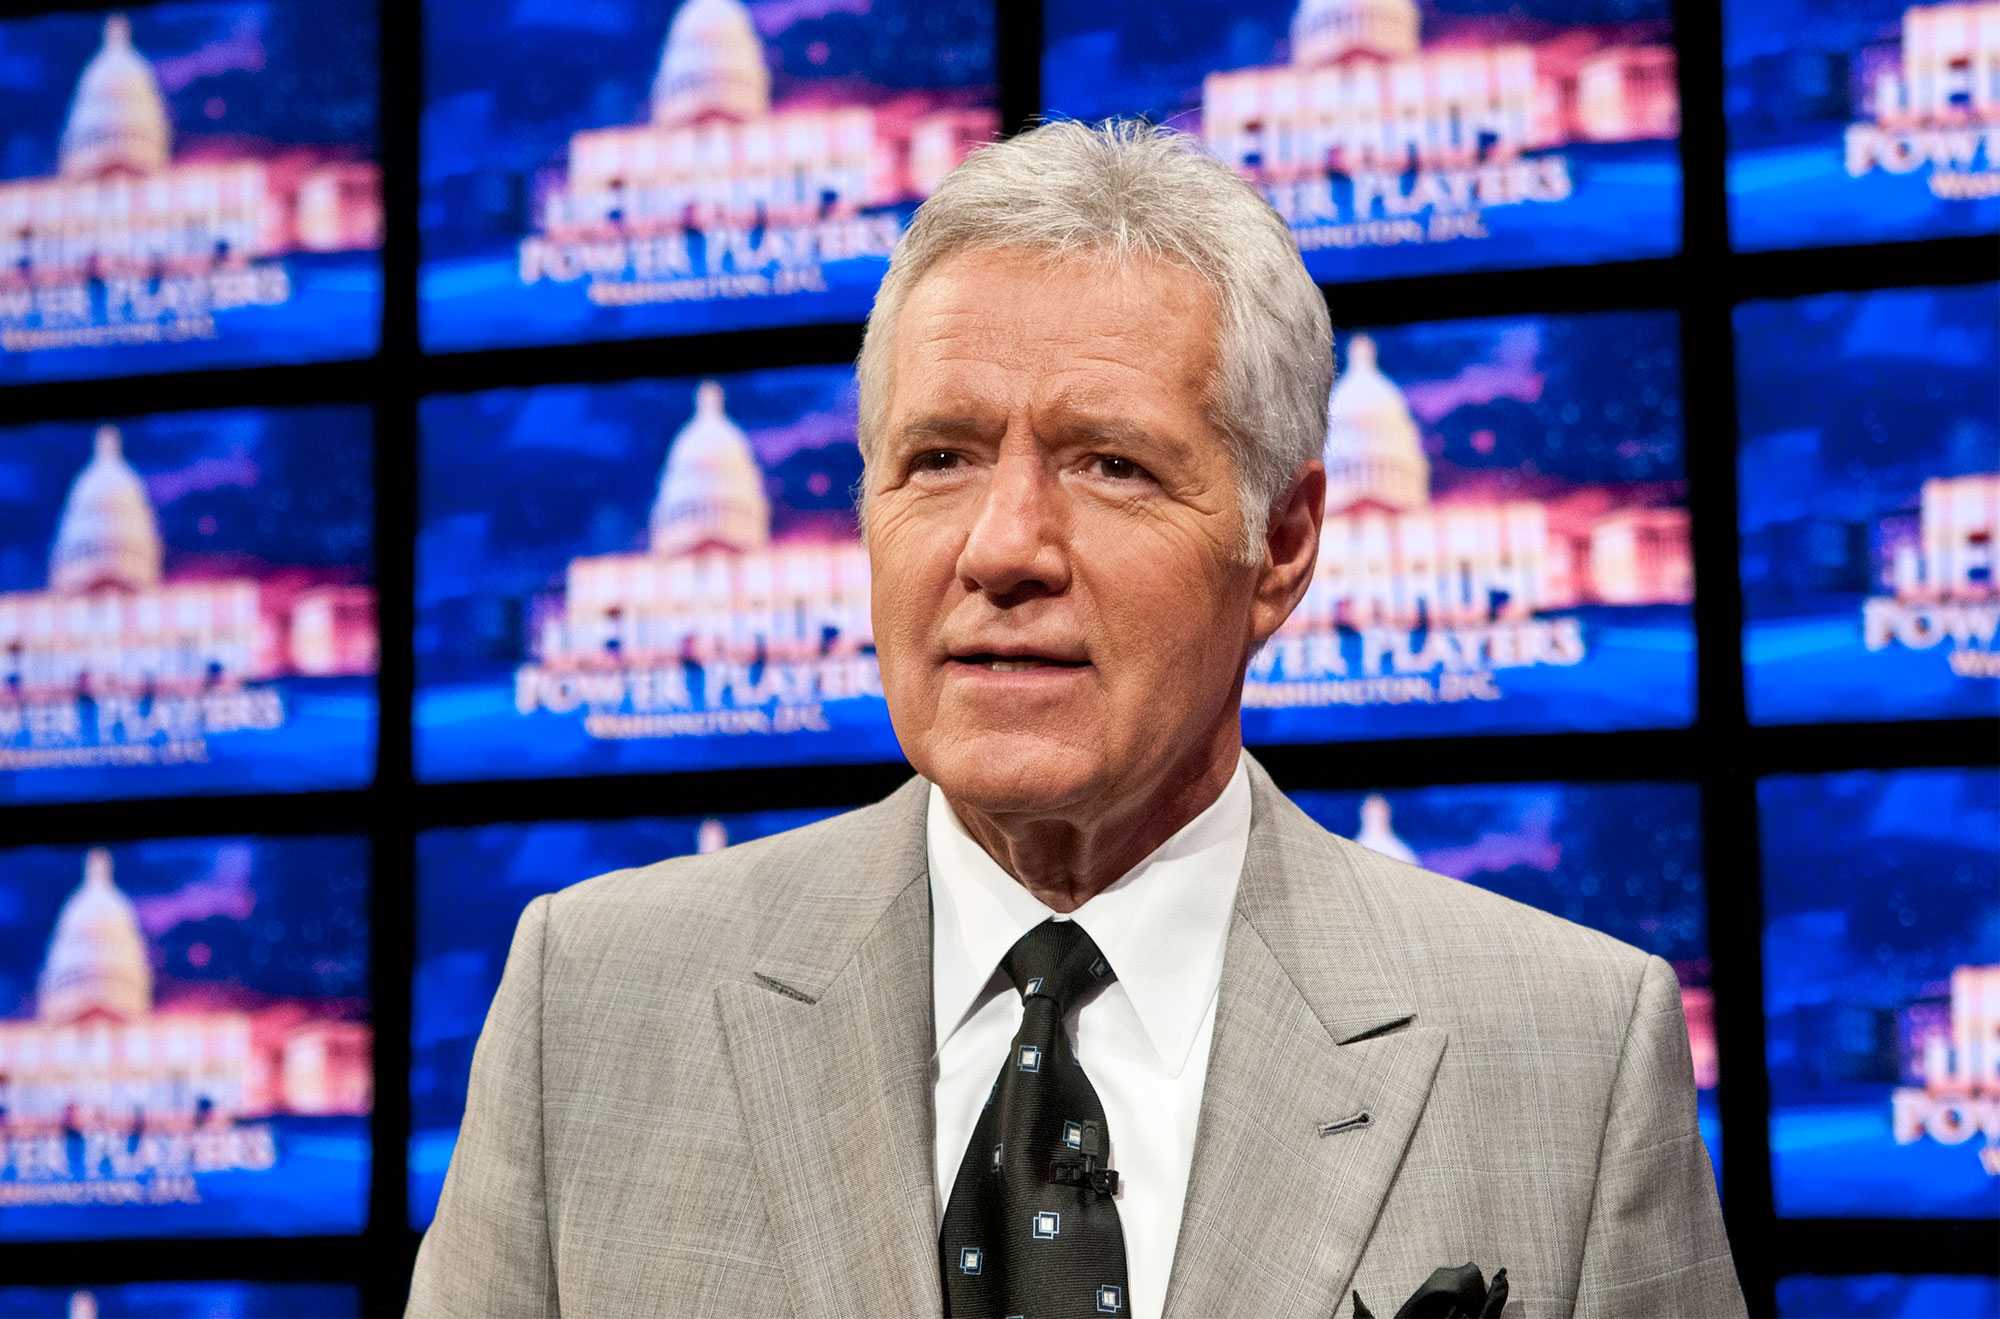 Pancreatic Cancer Experts Available in Response to Alex Trebek Death